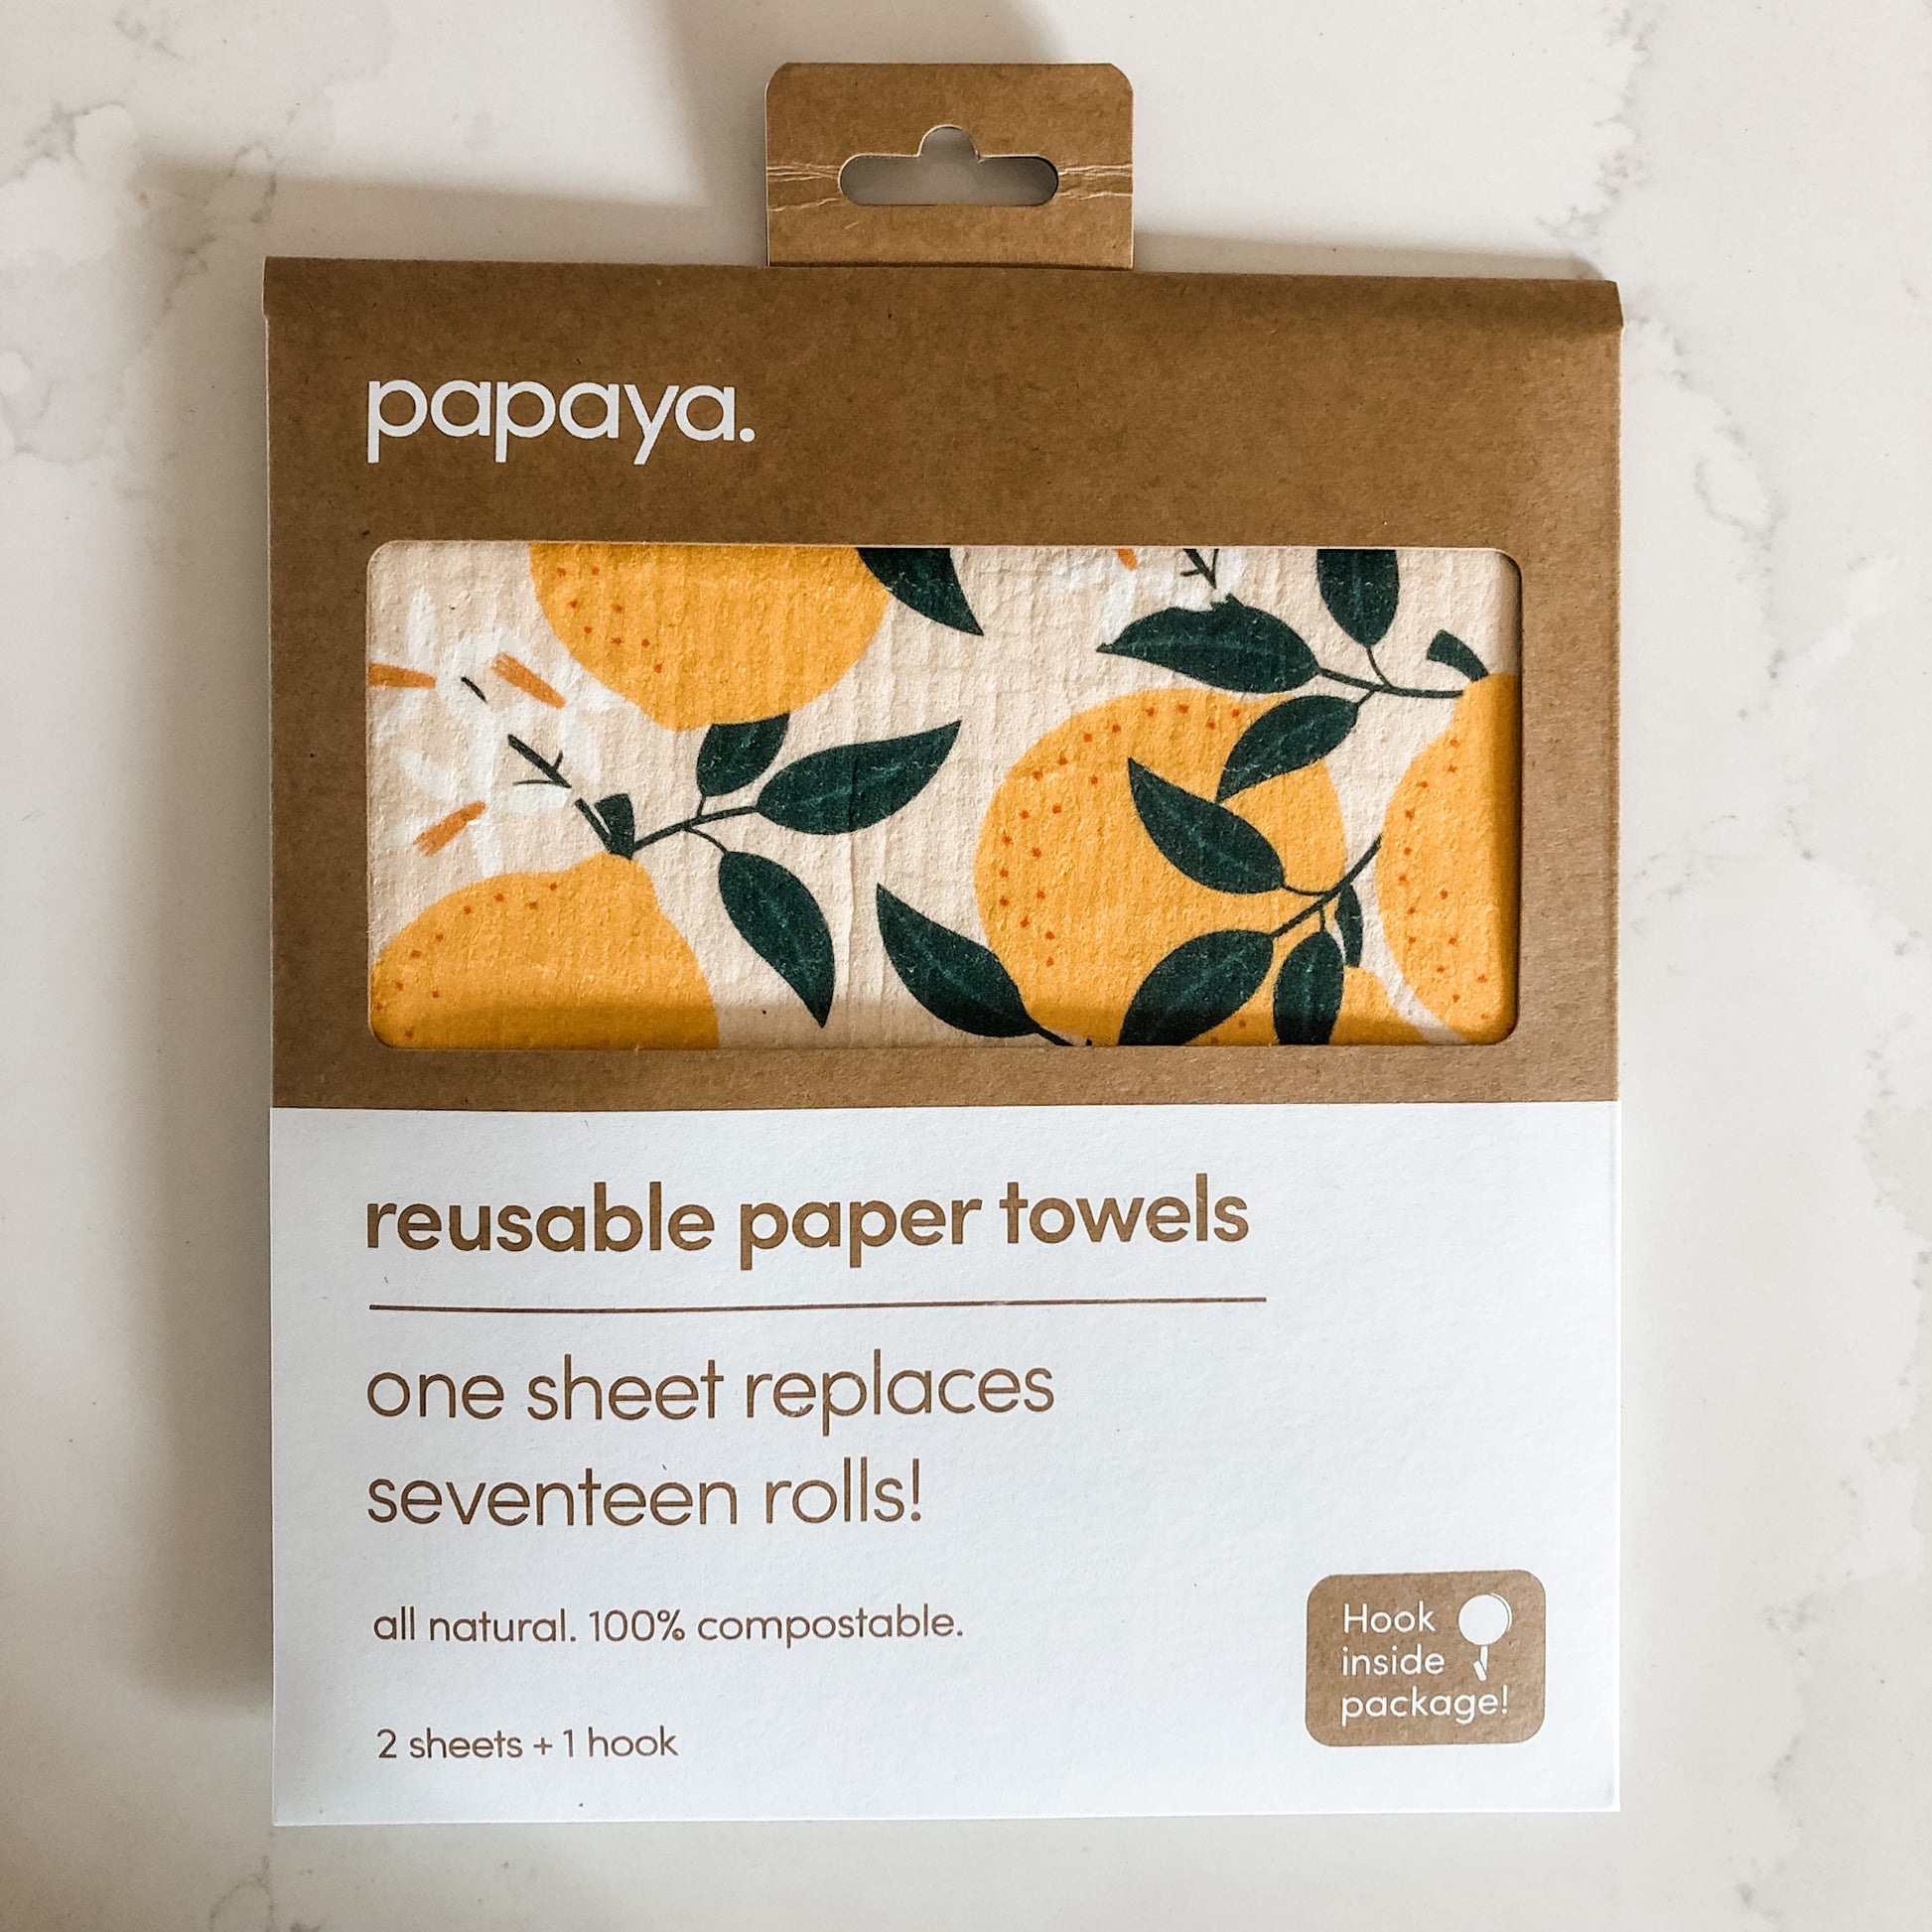 The Art Towels - Reusable Paper Towels Washable Roll Extra Large 12 pack -  2 Reusable Bowl Covers & Wall Hook Included - Papaya Reusable Paper Towels